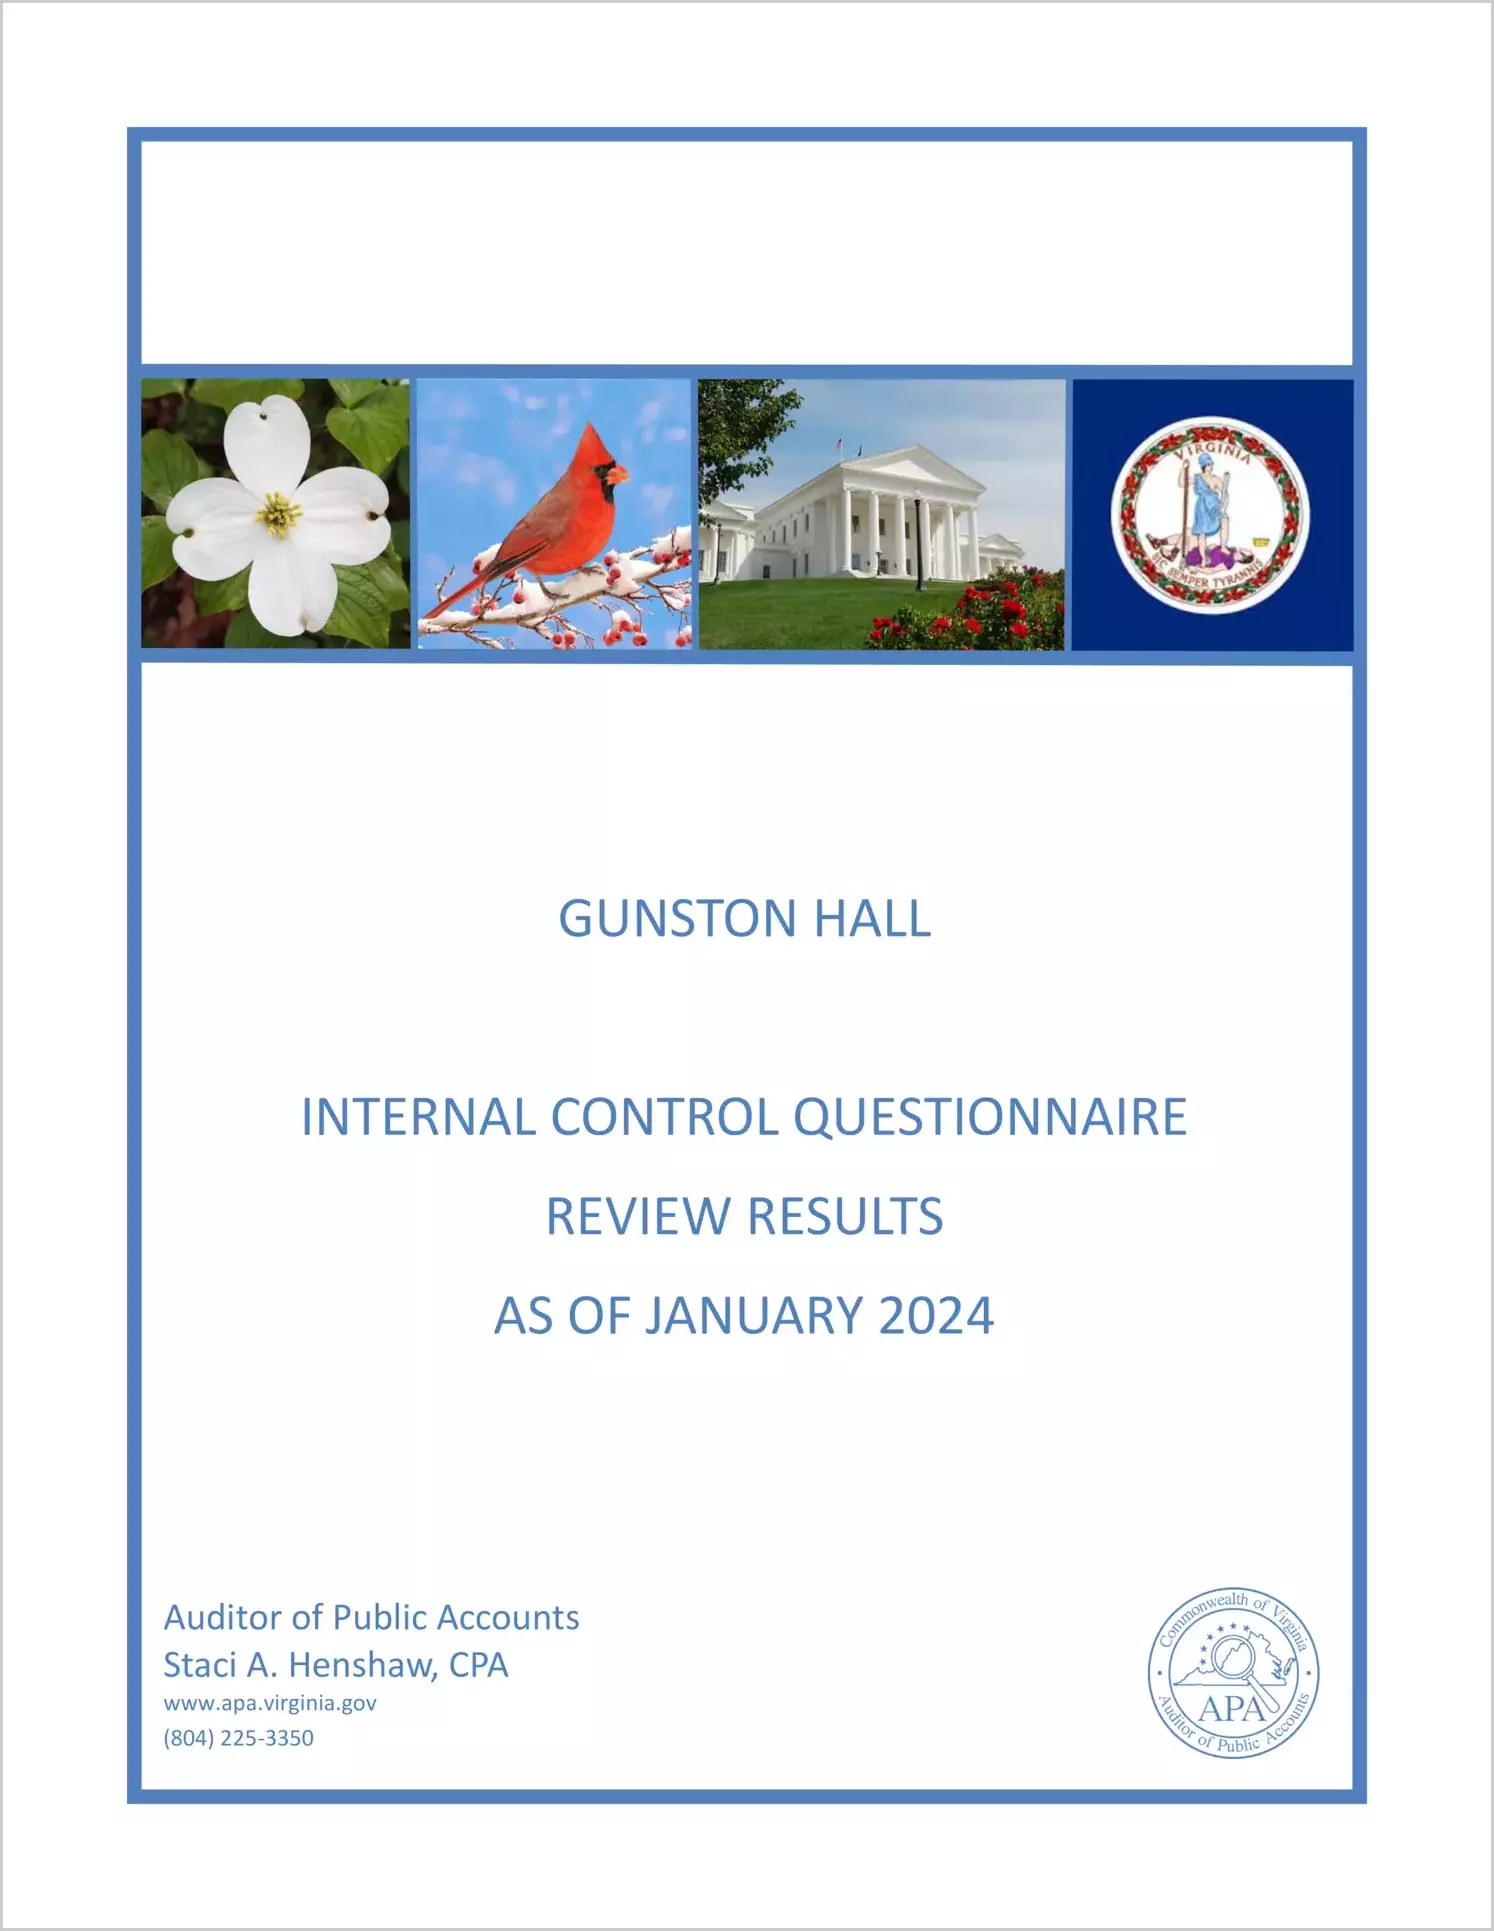 Gunston Hall Internal Control Questionnaire Review Results as of January 2024